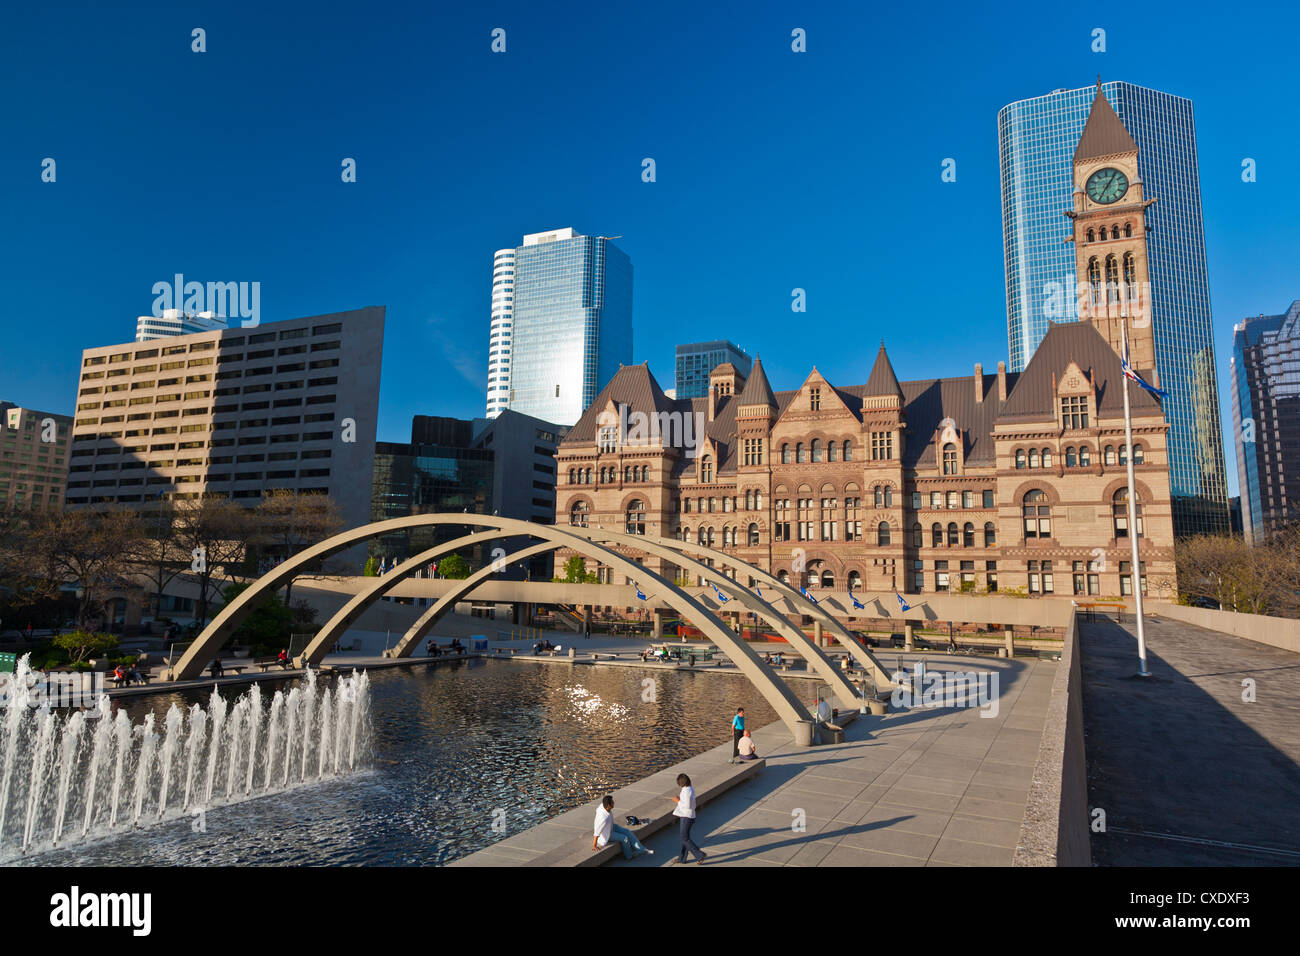 Freedom Arches, Nathan Phiilips Square, in front of City Hall, Toronto, Ontario, Canada, North America Stock Photo